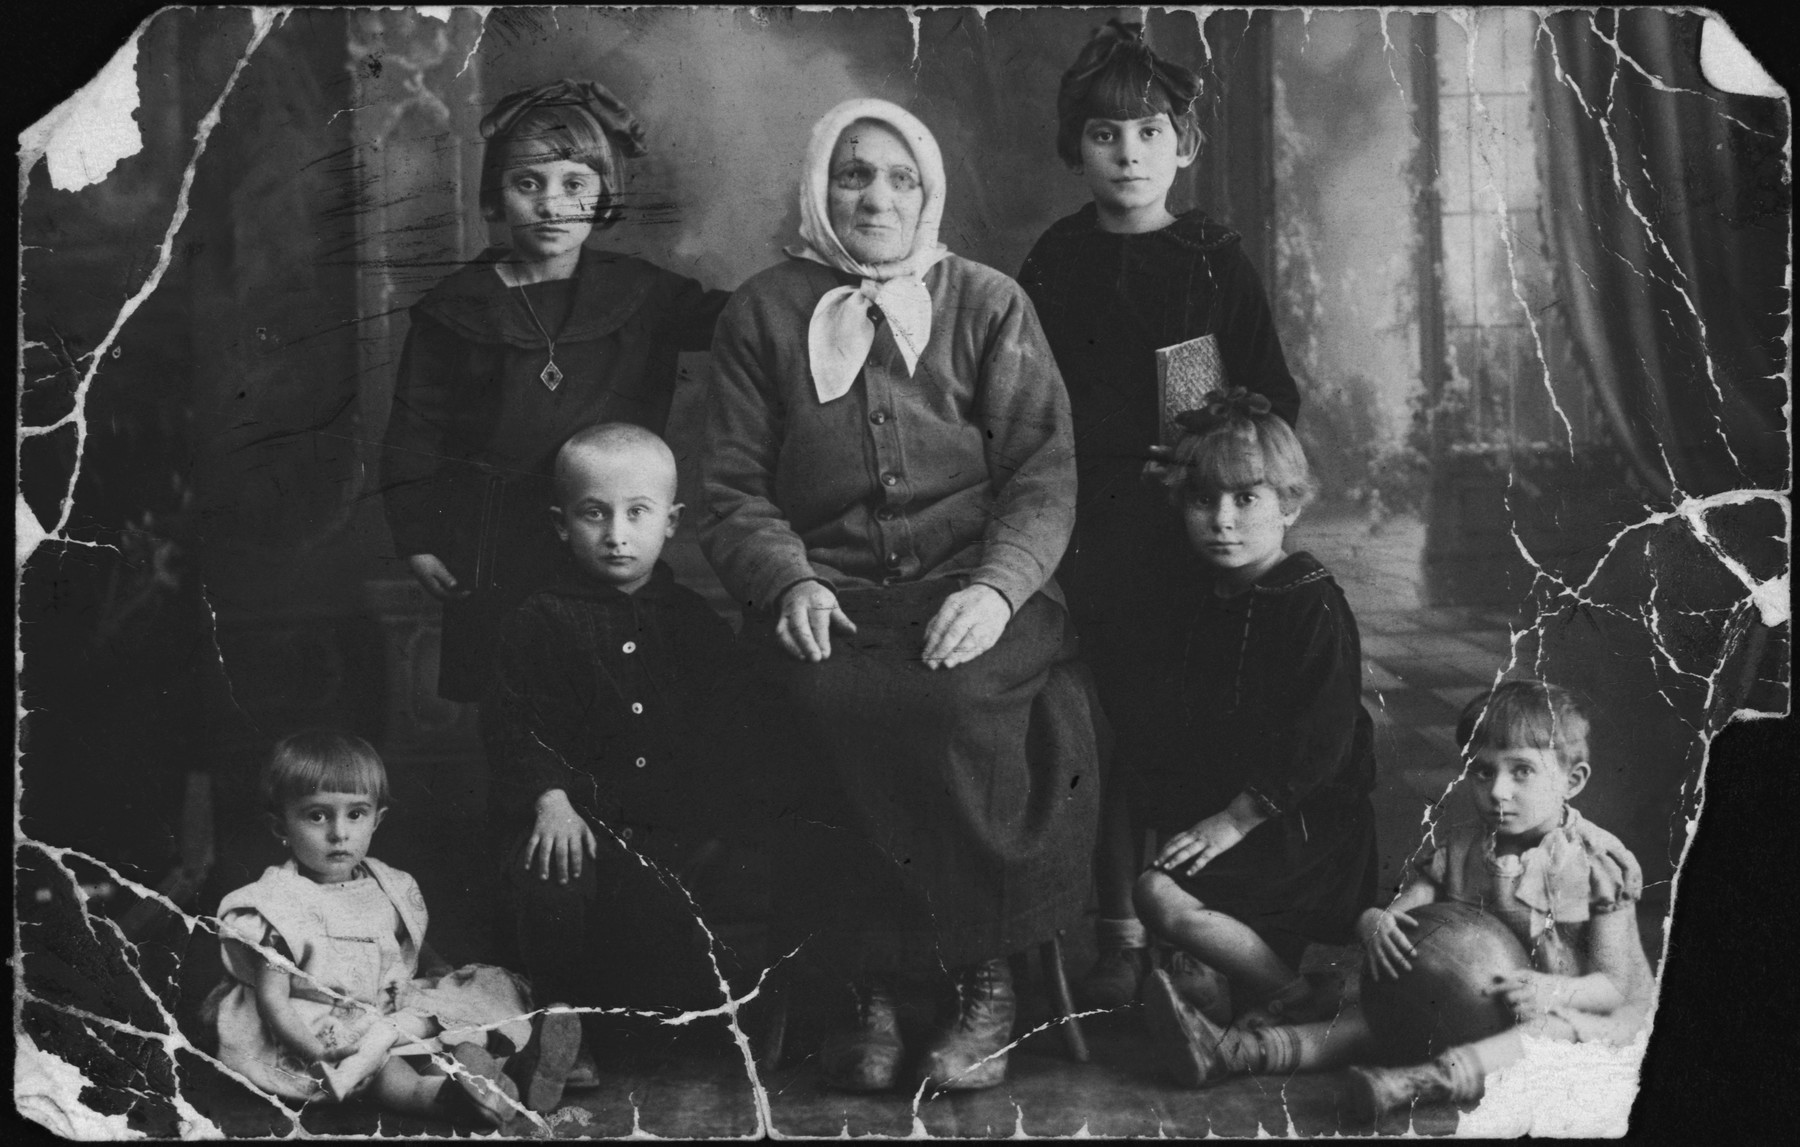 Studio portrait of a Jewish family in Pruzhany.  All pictured perished in the Holocaust.

The original caption reads "Two girls are daughters of Rifke.  My grandchildren.  The little boy is Rifke's grandchild.  The little girl is Tsiri's; the second girl is Berl's.  In memory from your grandmother, Shayne Khayes."